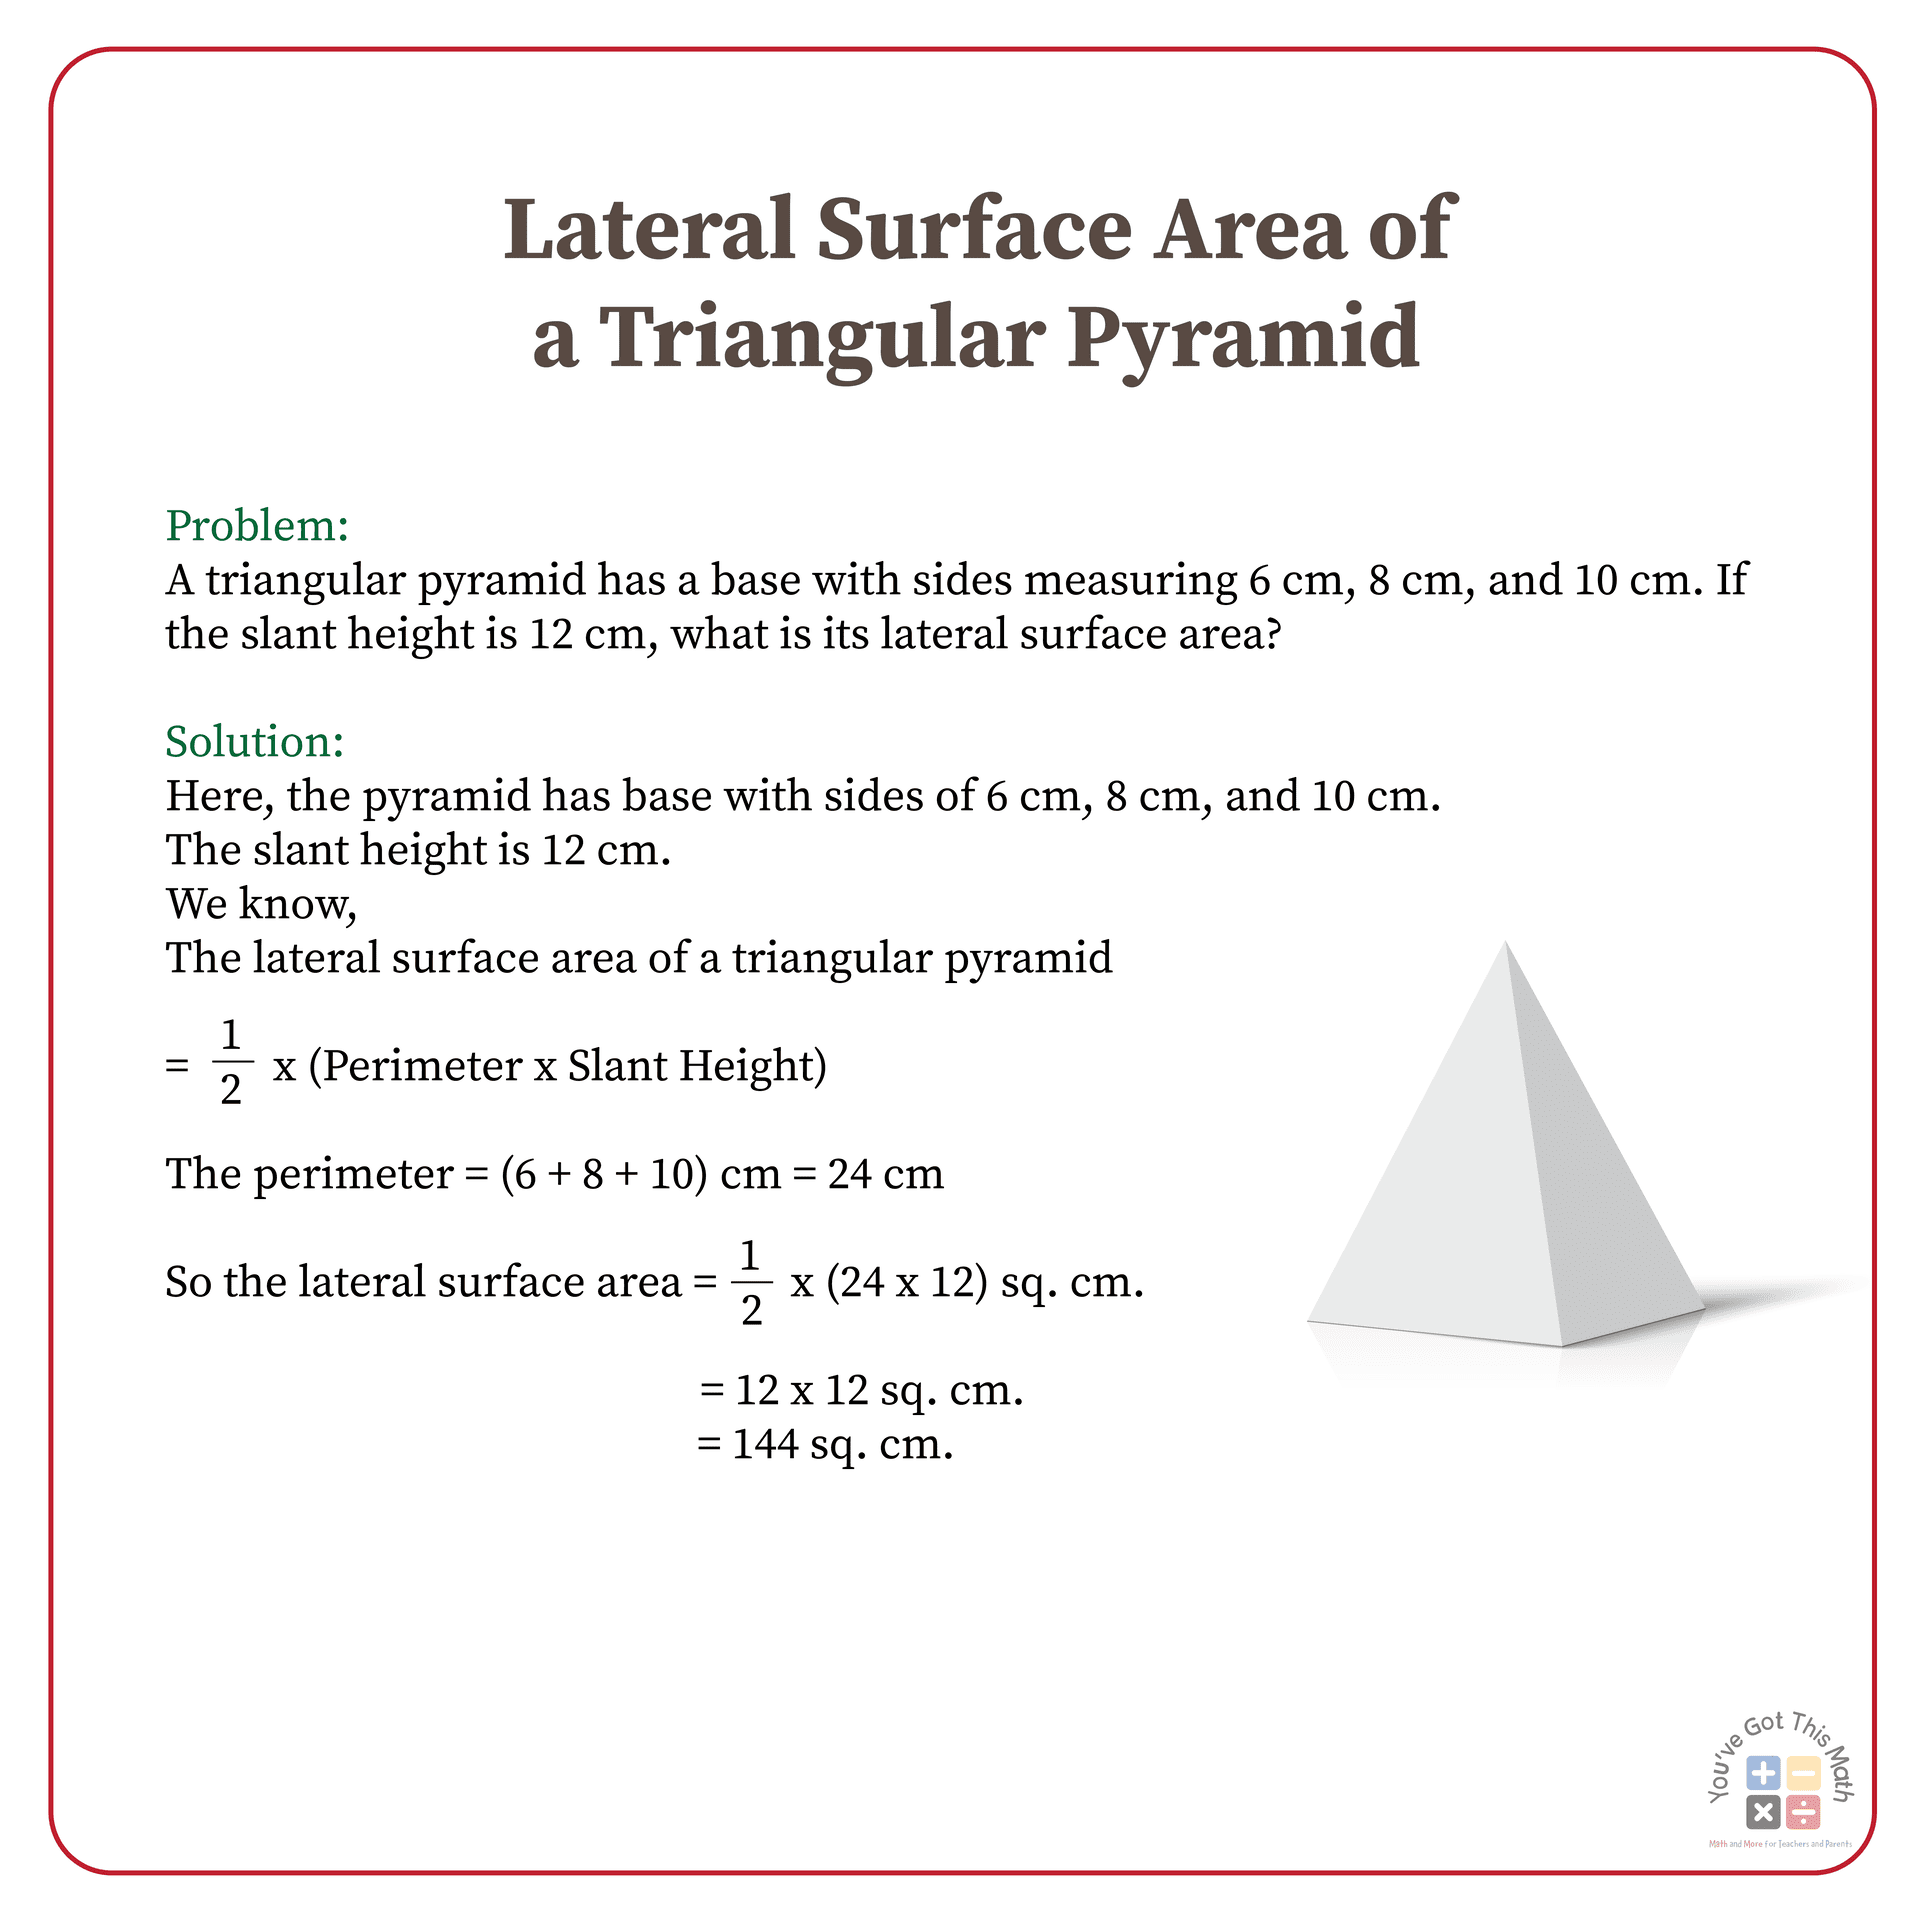 Formula for lateral surface area of a triangular pyramid